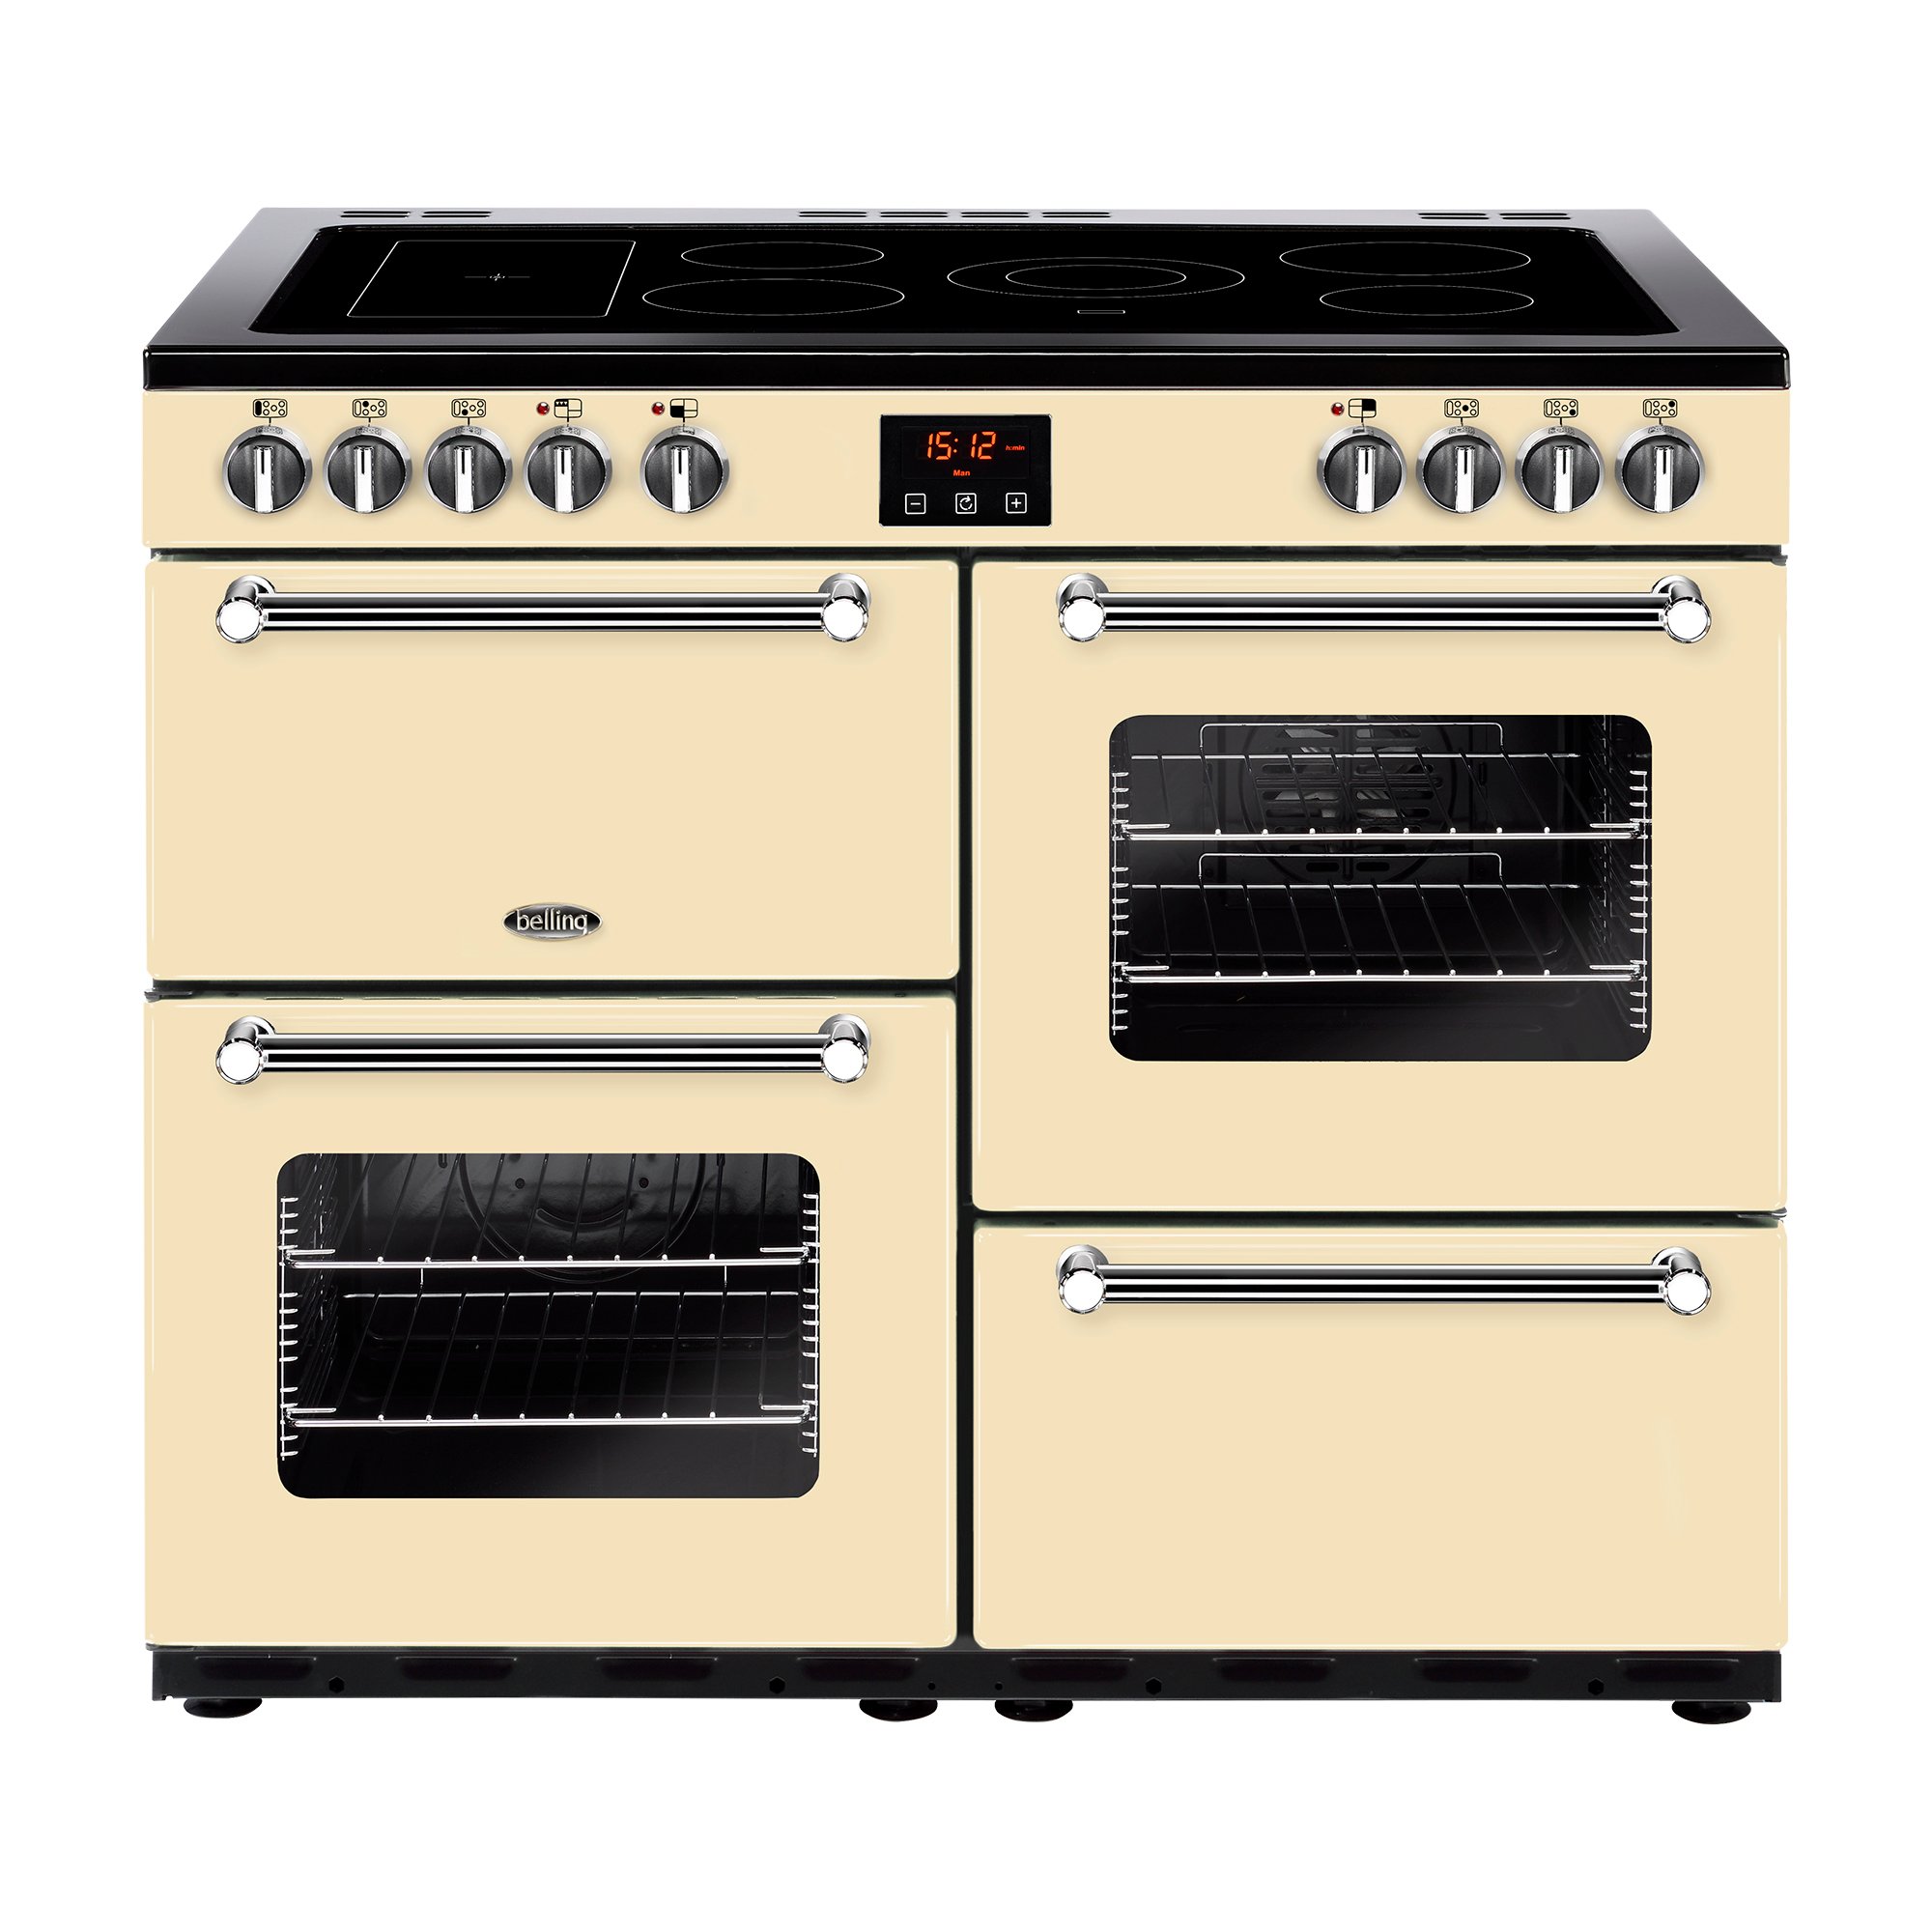 100cm electric range cooker with 5 zone ceramic hob and additional warming zone, variable rate electric grill, 2 conventional ovens and a main fanned oven.